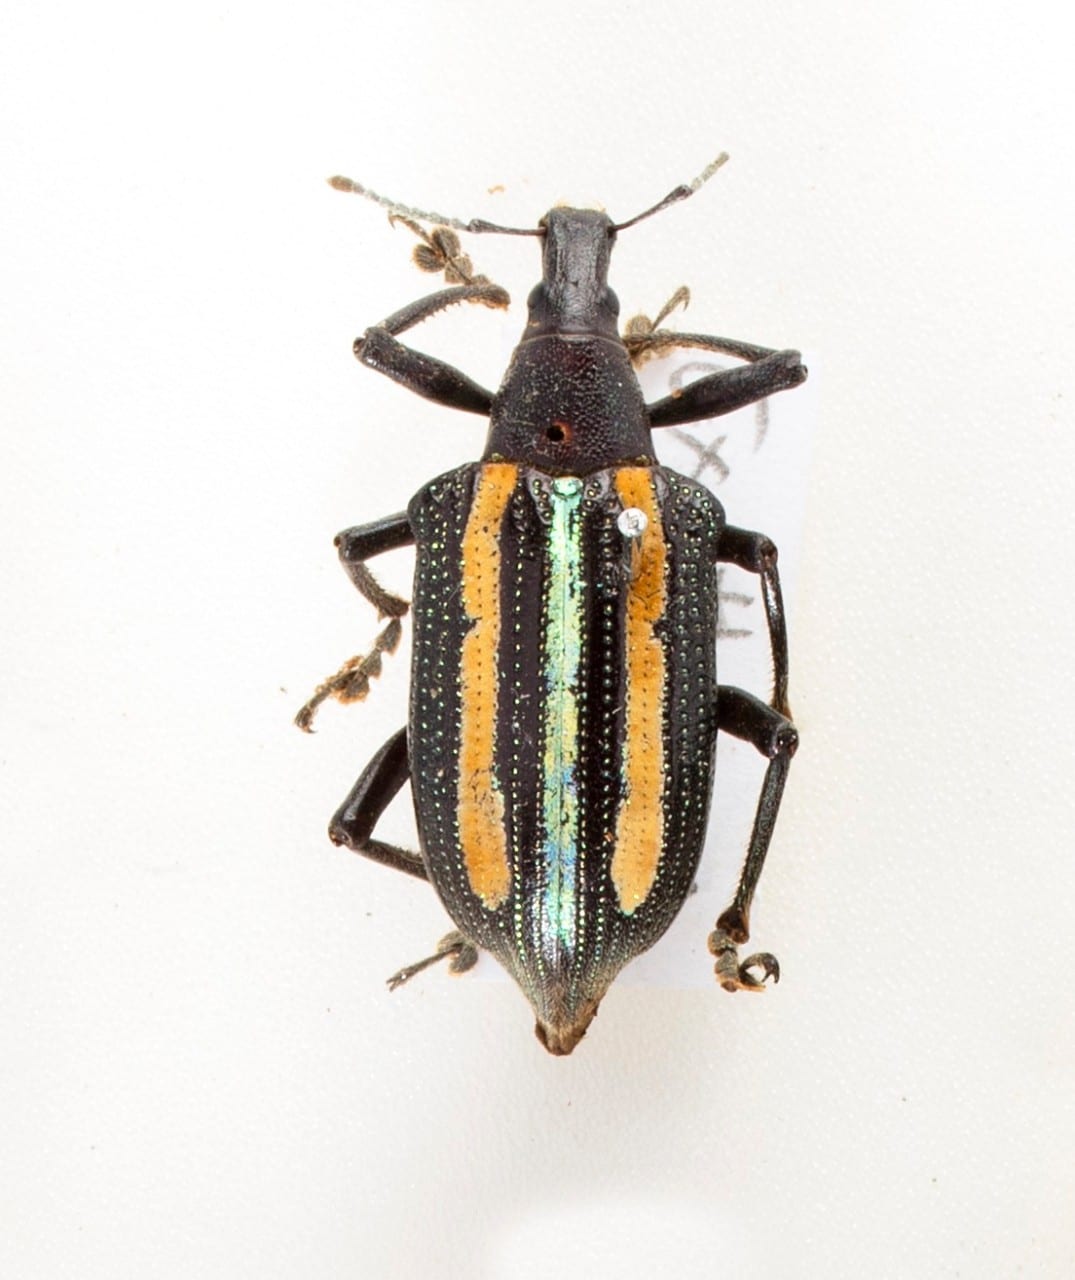 Black, yellow and green beetle